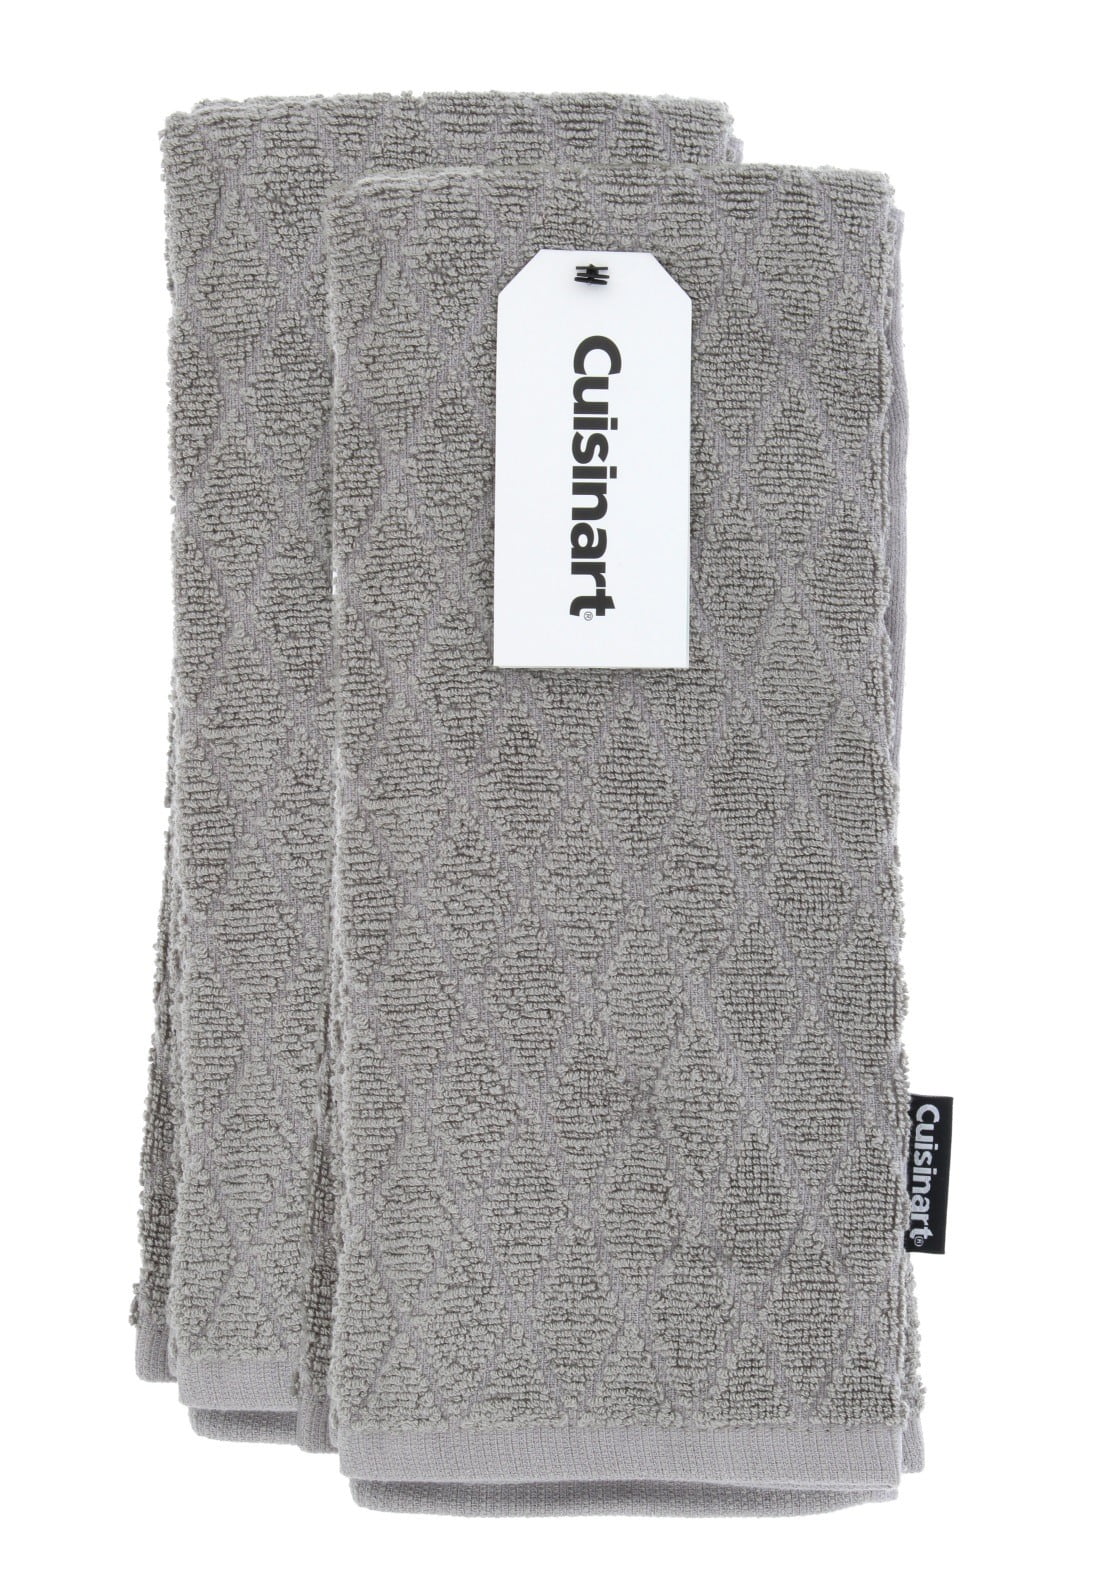 Bark-Effect Design 16 x 26 Absorbent Drizzle Grey 2 Pack Soft and Anti-Microbial-Premium Bamboo / Cotton Blend Cuisinart Bamboo Dish Towel Set-Kitchen and Hand Towels for Drying Dishes / Hands 